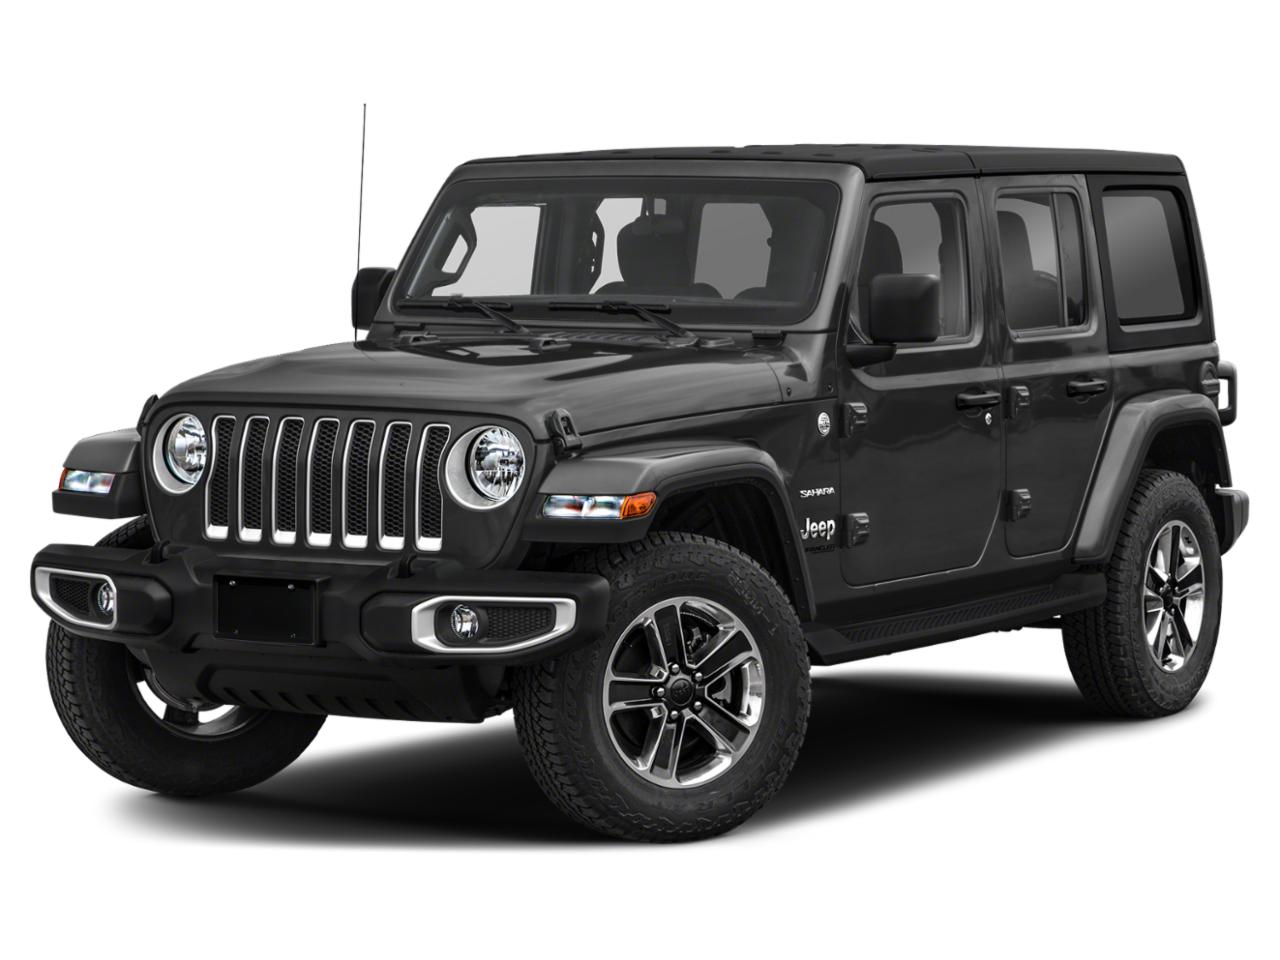 Used, Certified Jeep Wrangler Unlimited Vehicles for Sale at Vaughn  Chevrolet Lecompte